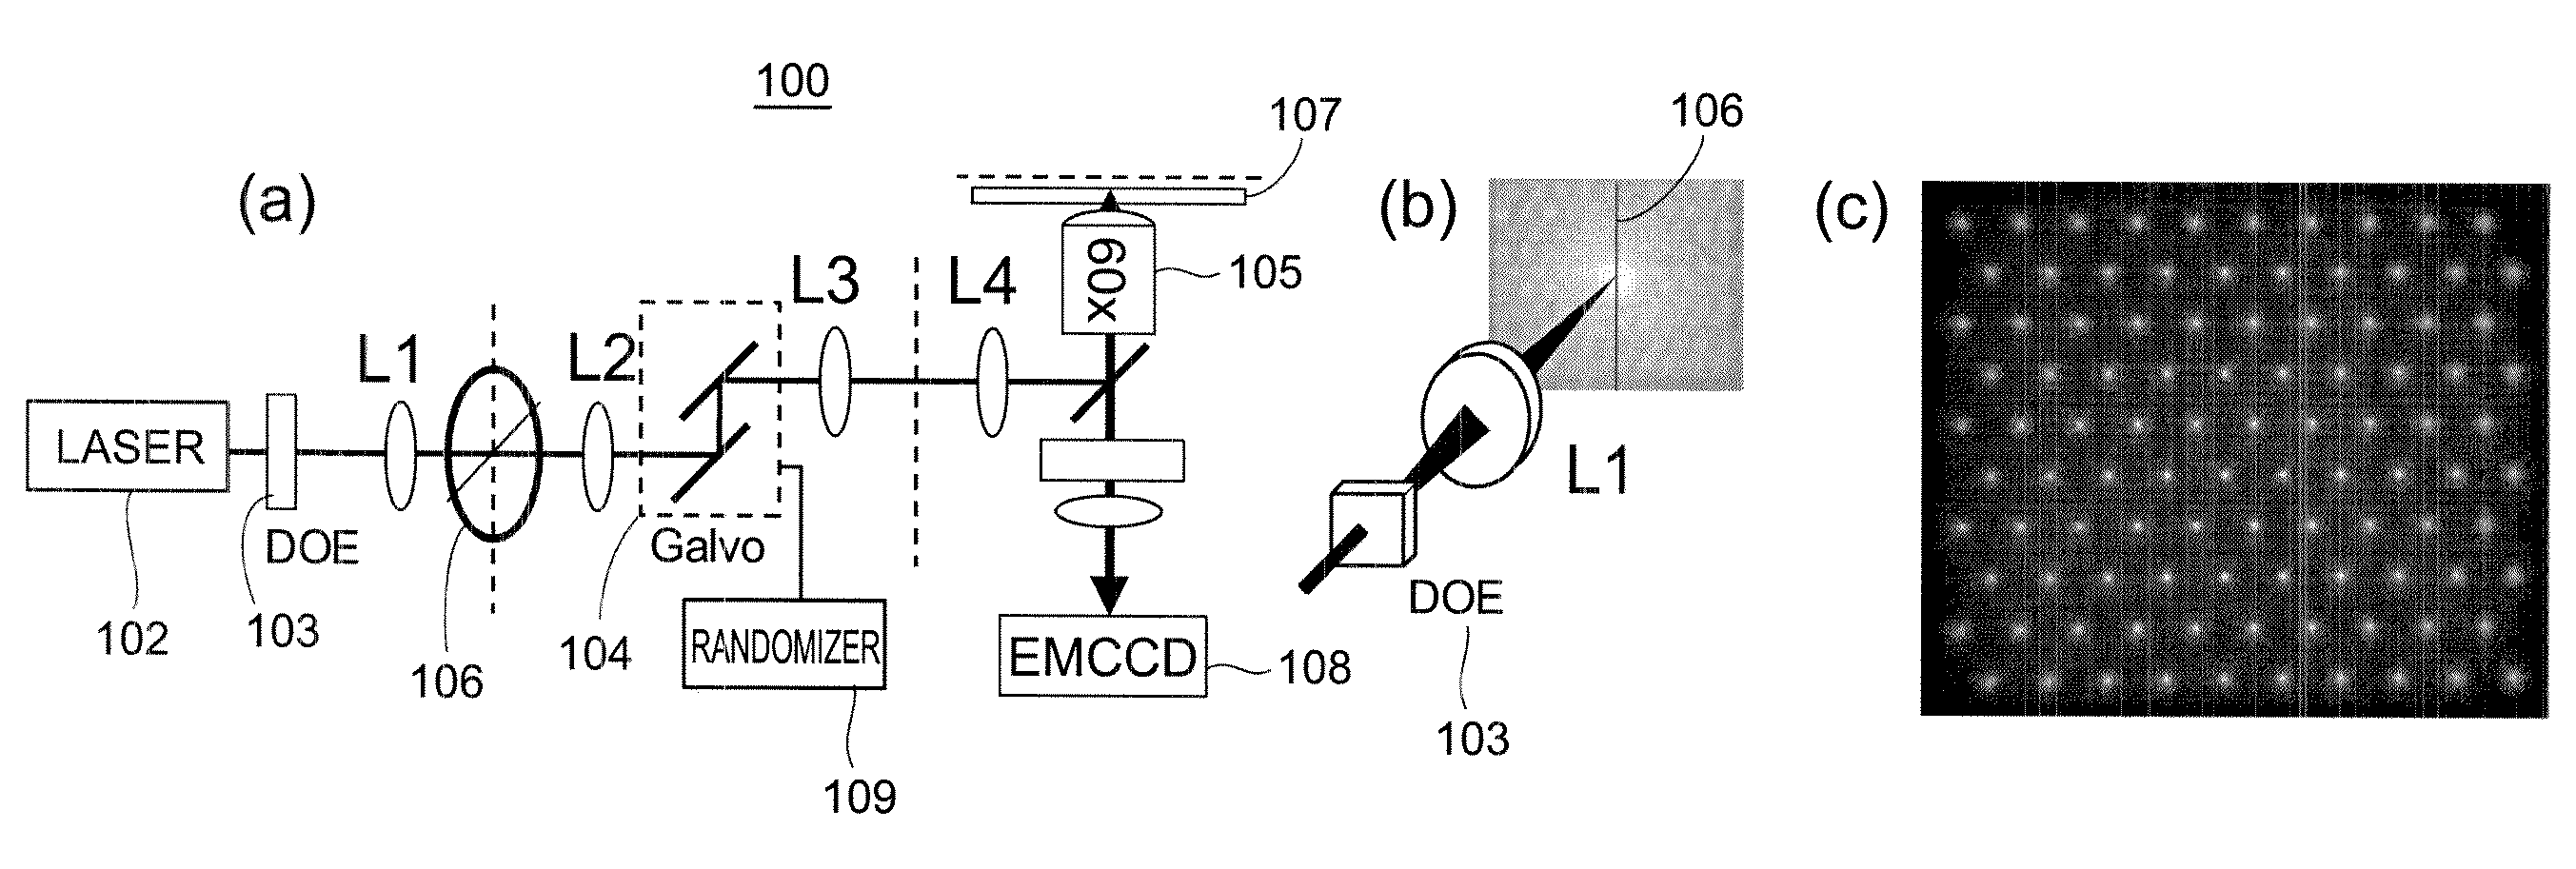 Stochastic scanning apparatus using multiphoton multifocal source